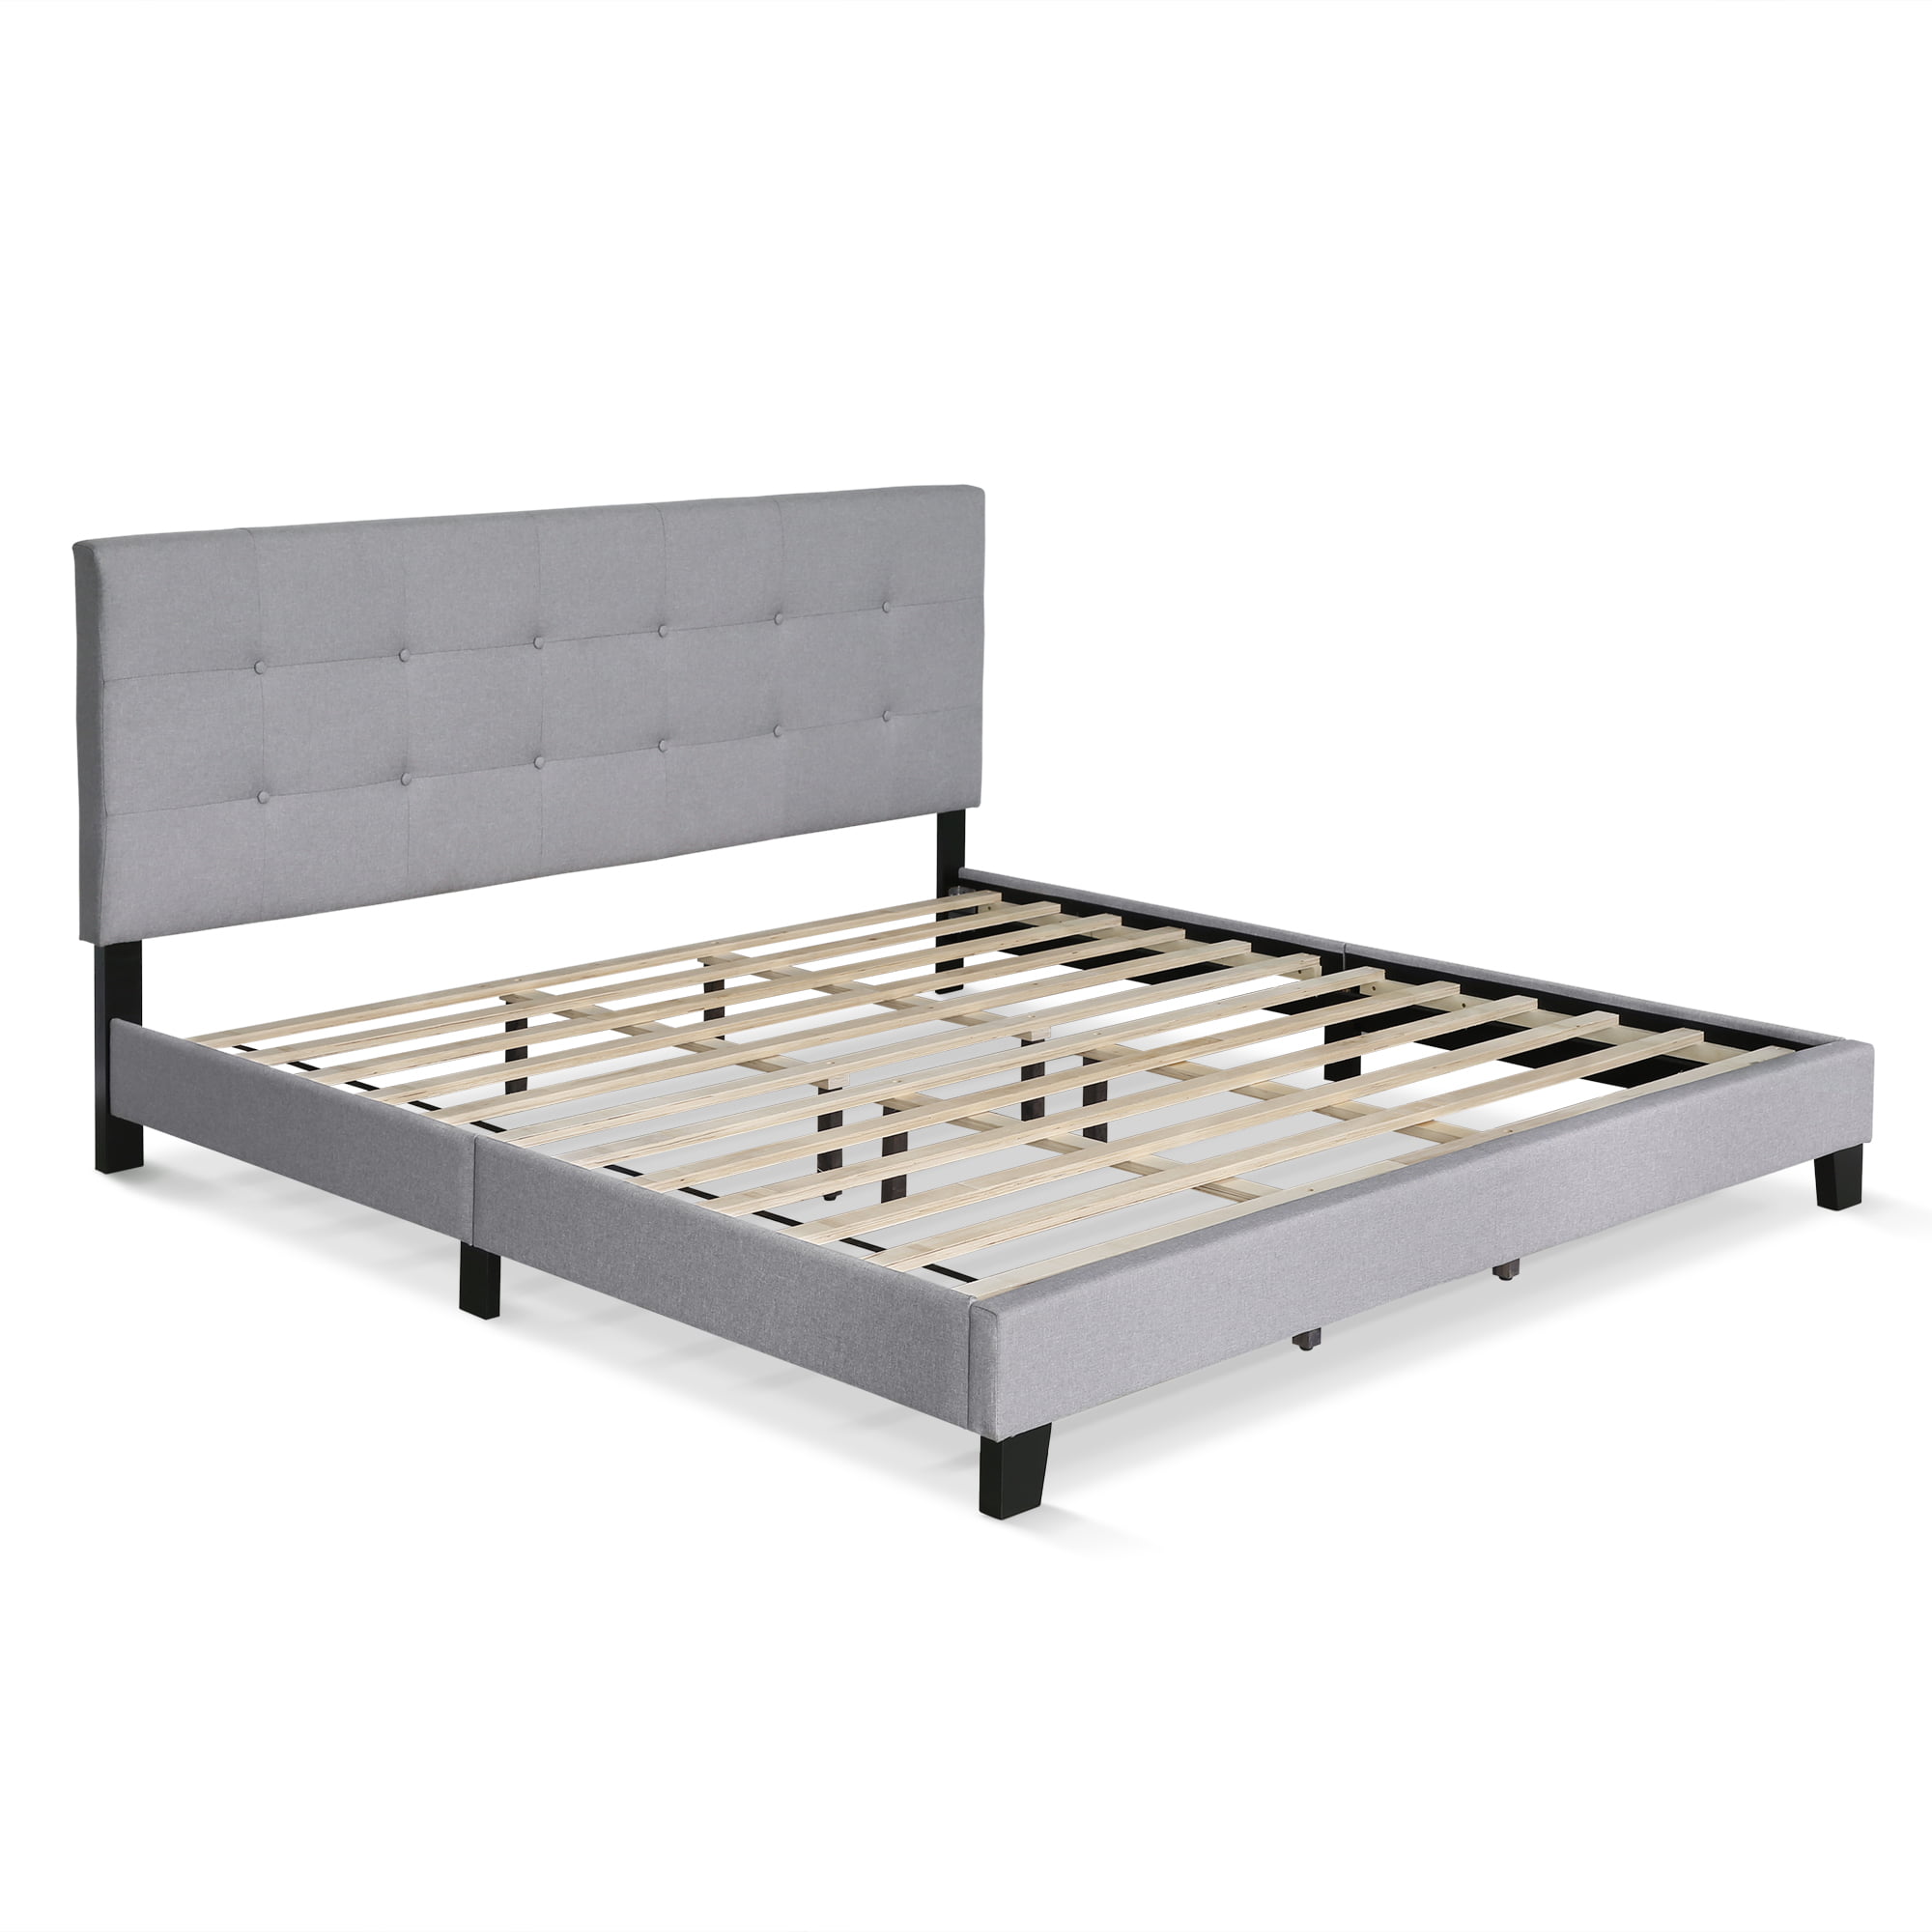 Furinno Laval Button Tufted Bed Frame, 12PC Slat Style, Glacier, King